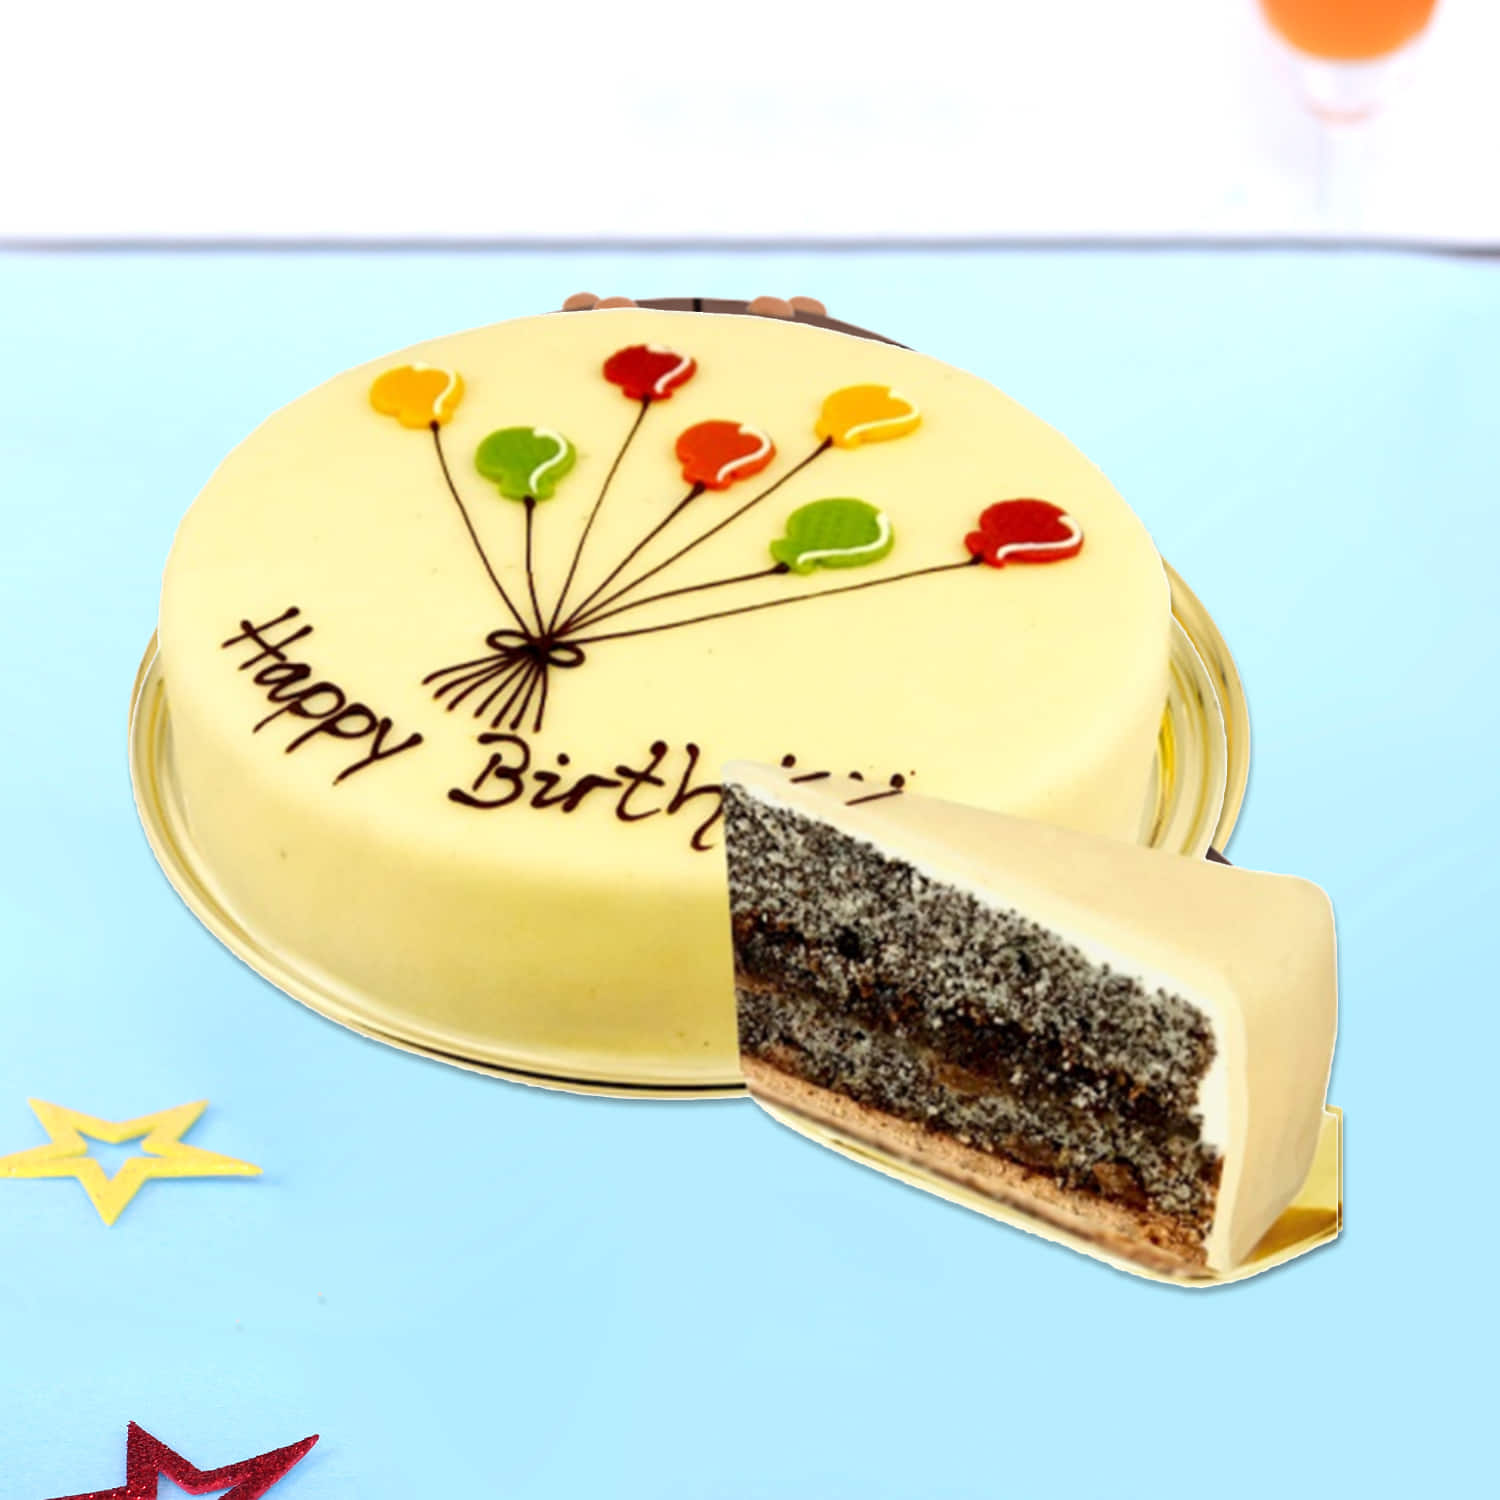 Бенто happy birthday, Confectionery & Bakery Lyubertsy, buy at a price of  1550 RUB, Bento Cakes on Magarotti.Cake with delivery | Flowwow